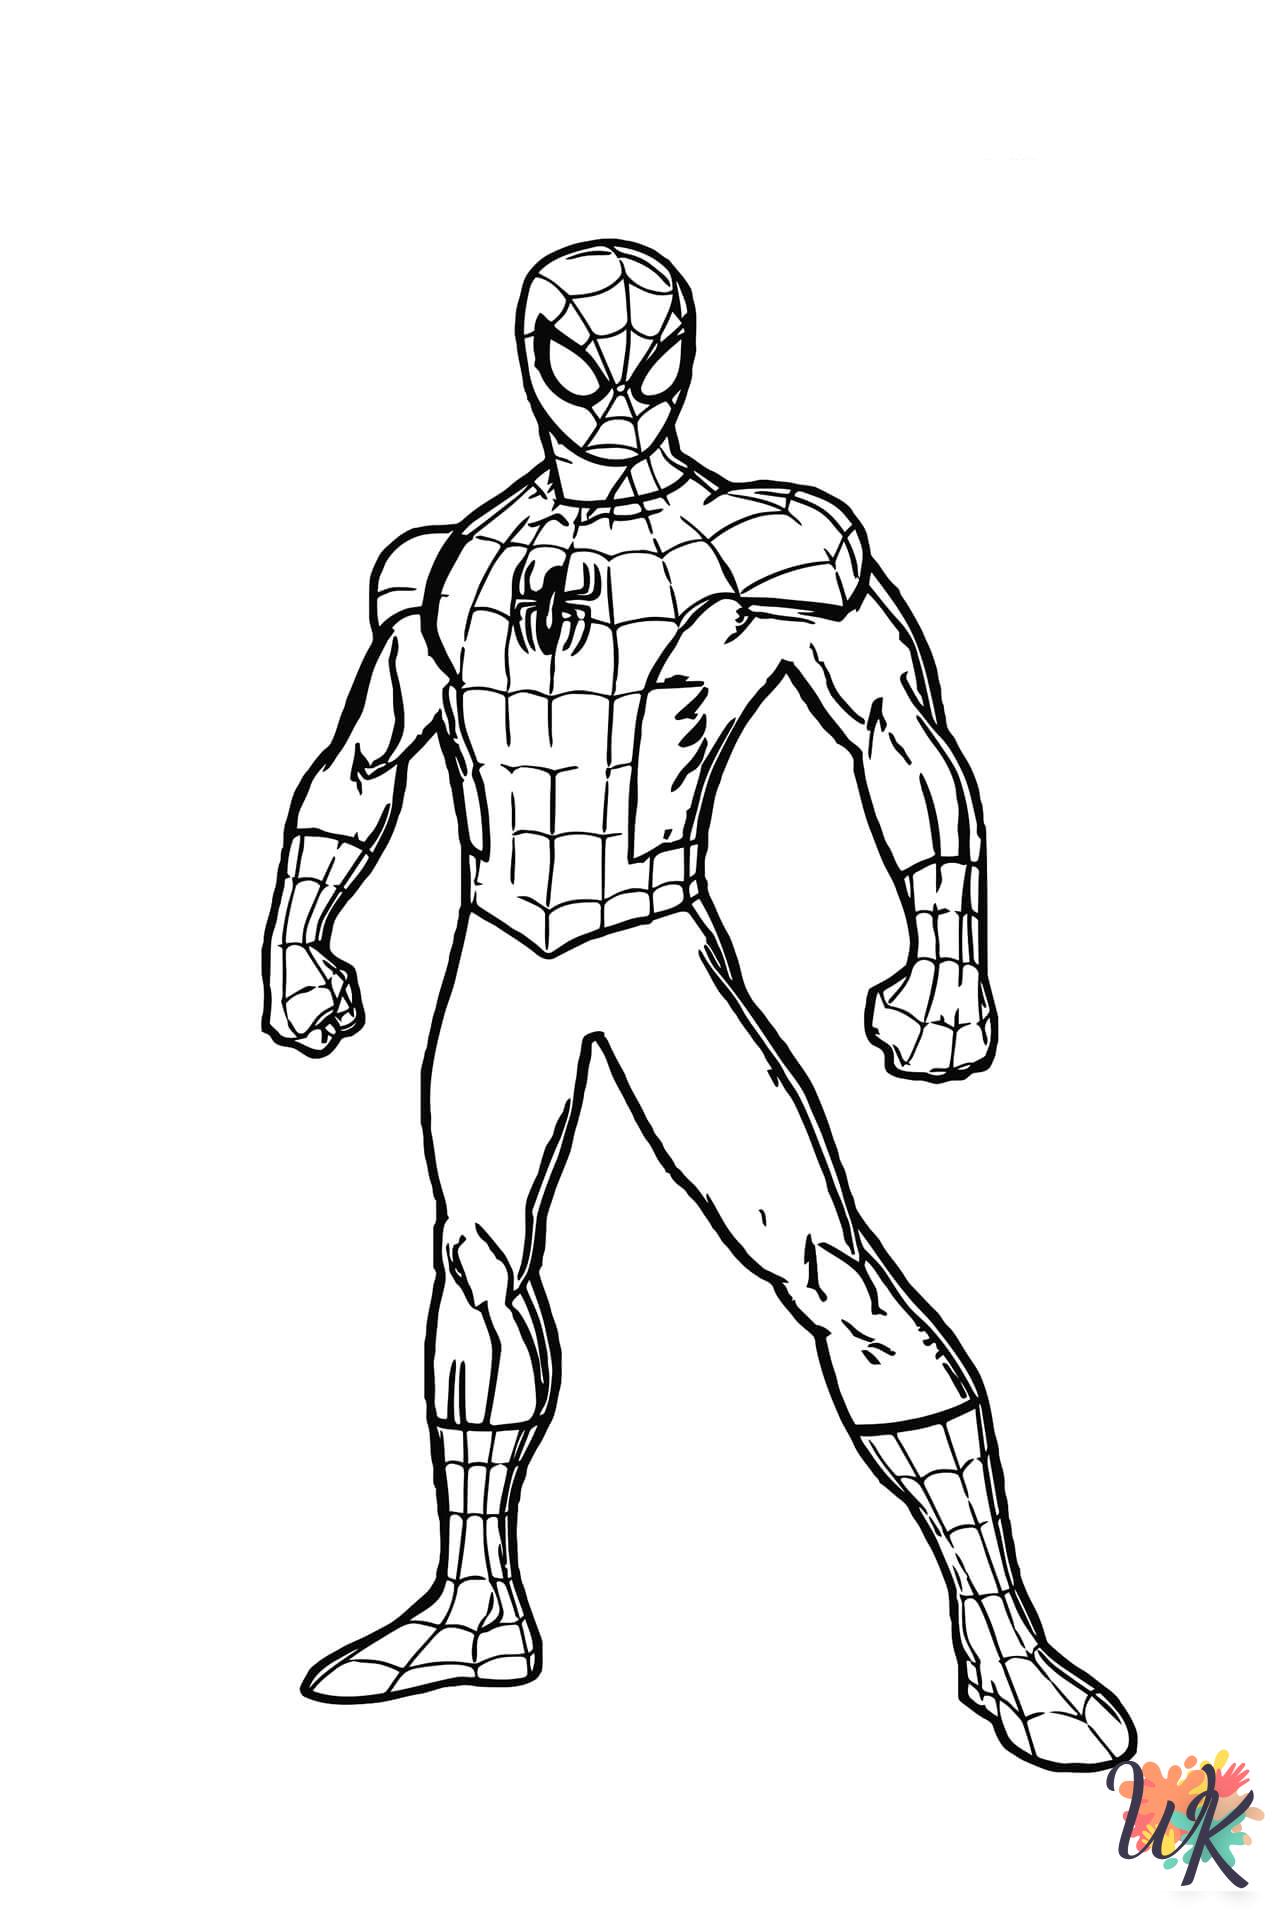 kids Superhero coloring pages